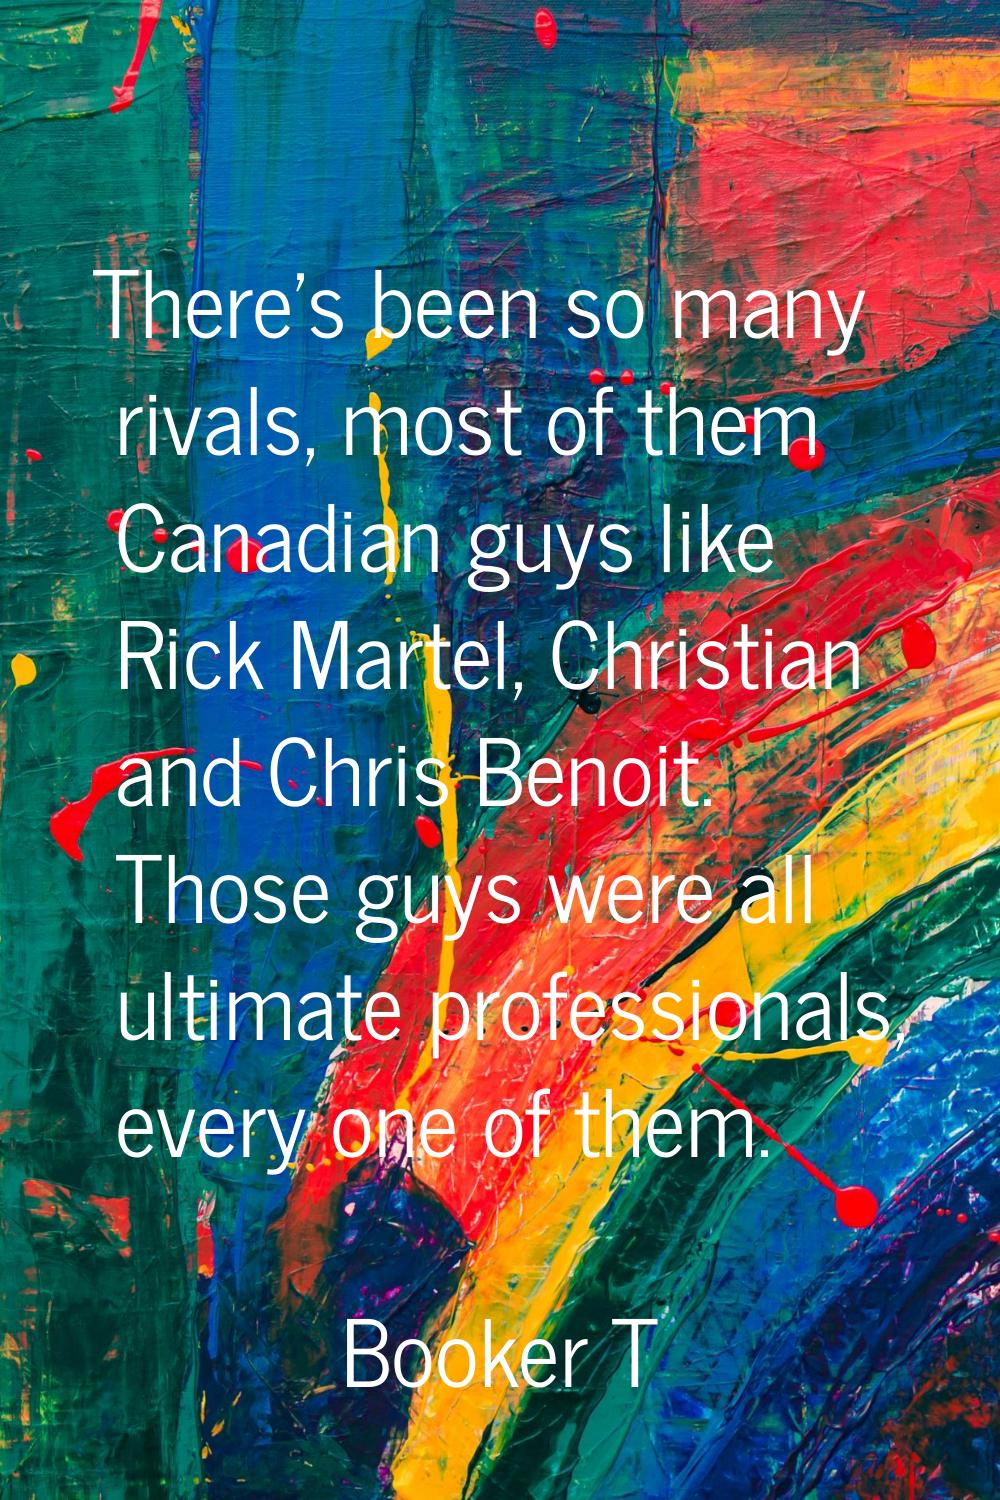 There's been so many rivals, most of them Canadian guys like Rick Martel, Christian and Chris Benoi